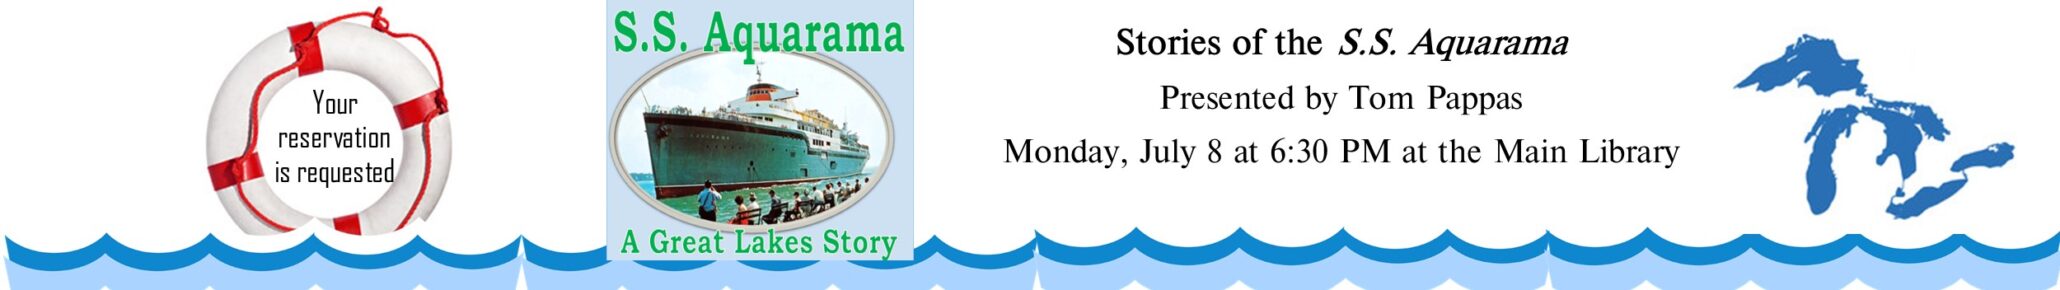 learn about the S S Aquarama at the main library on july 8